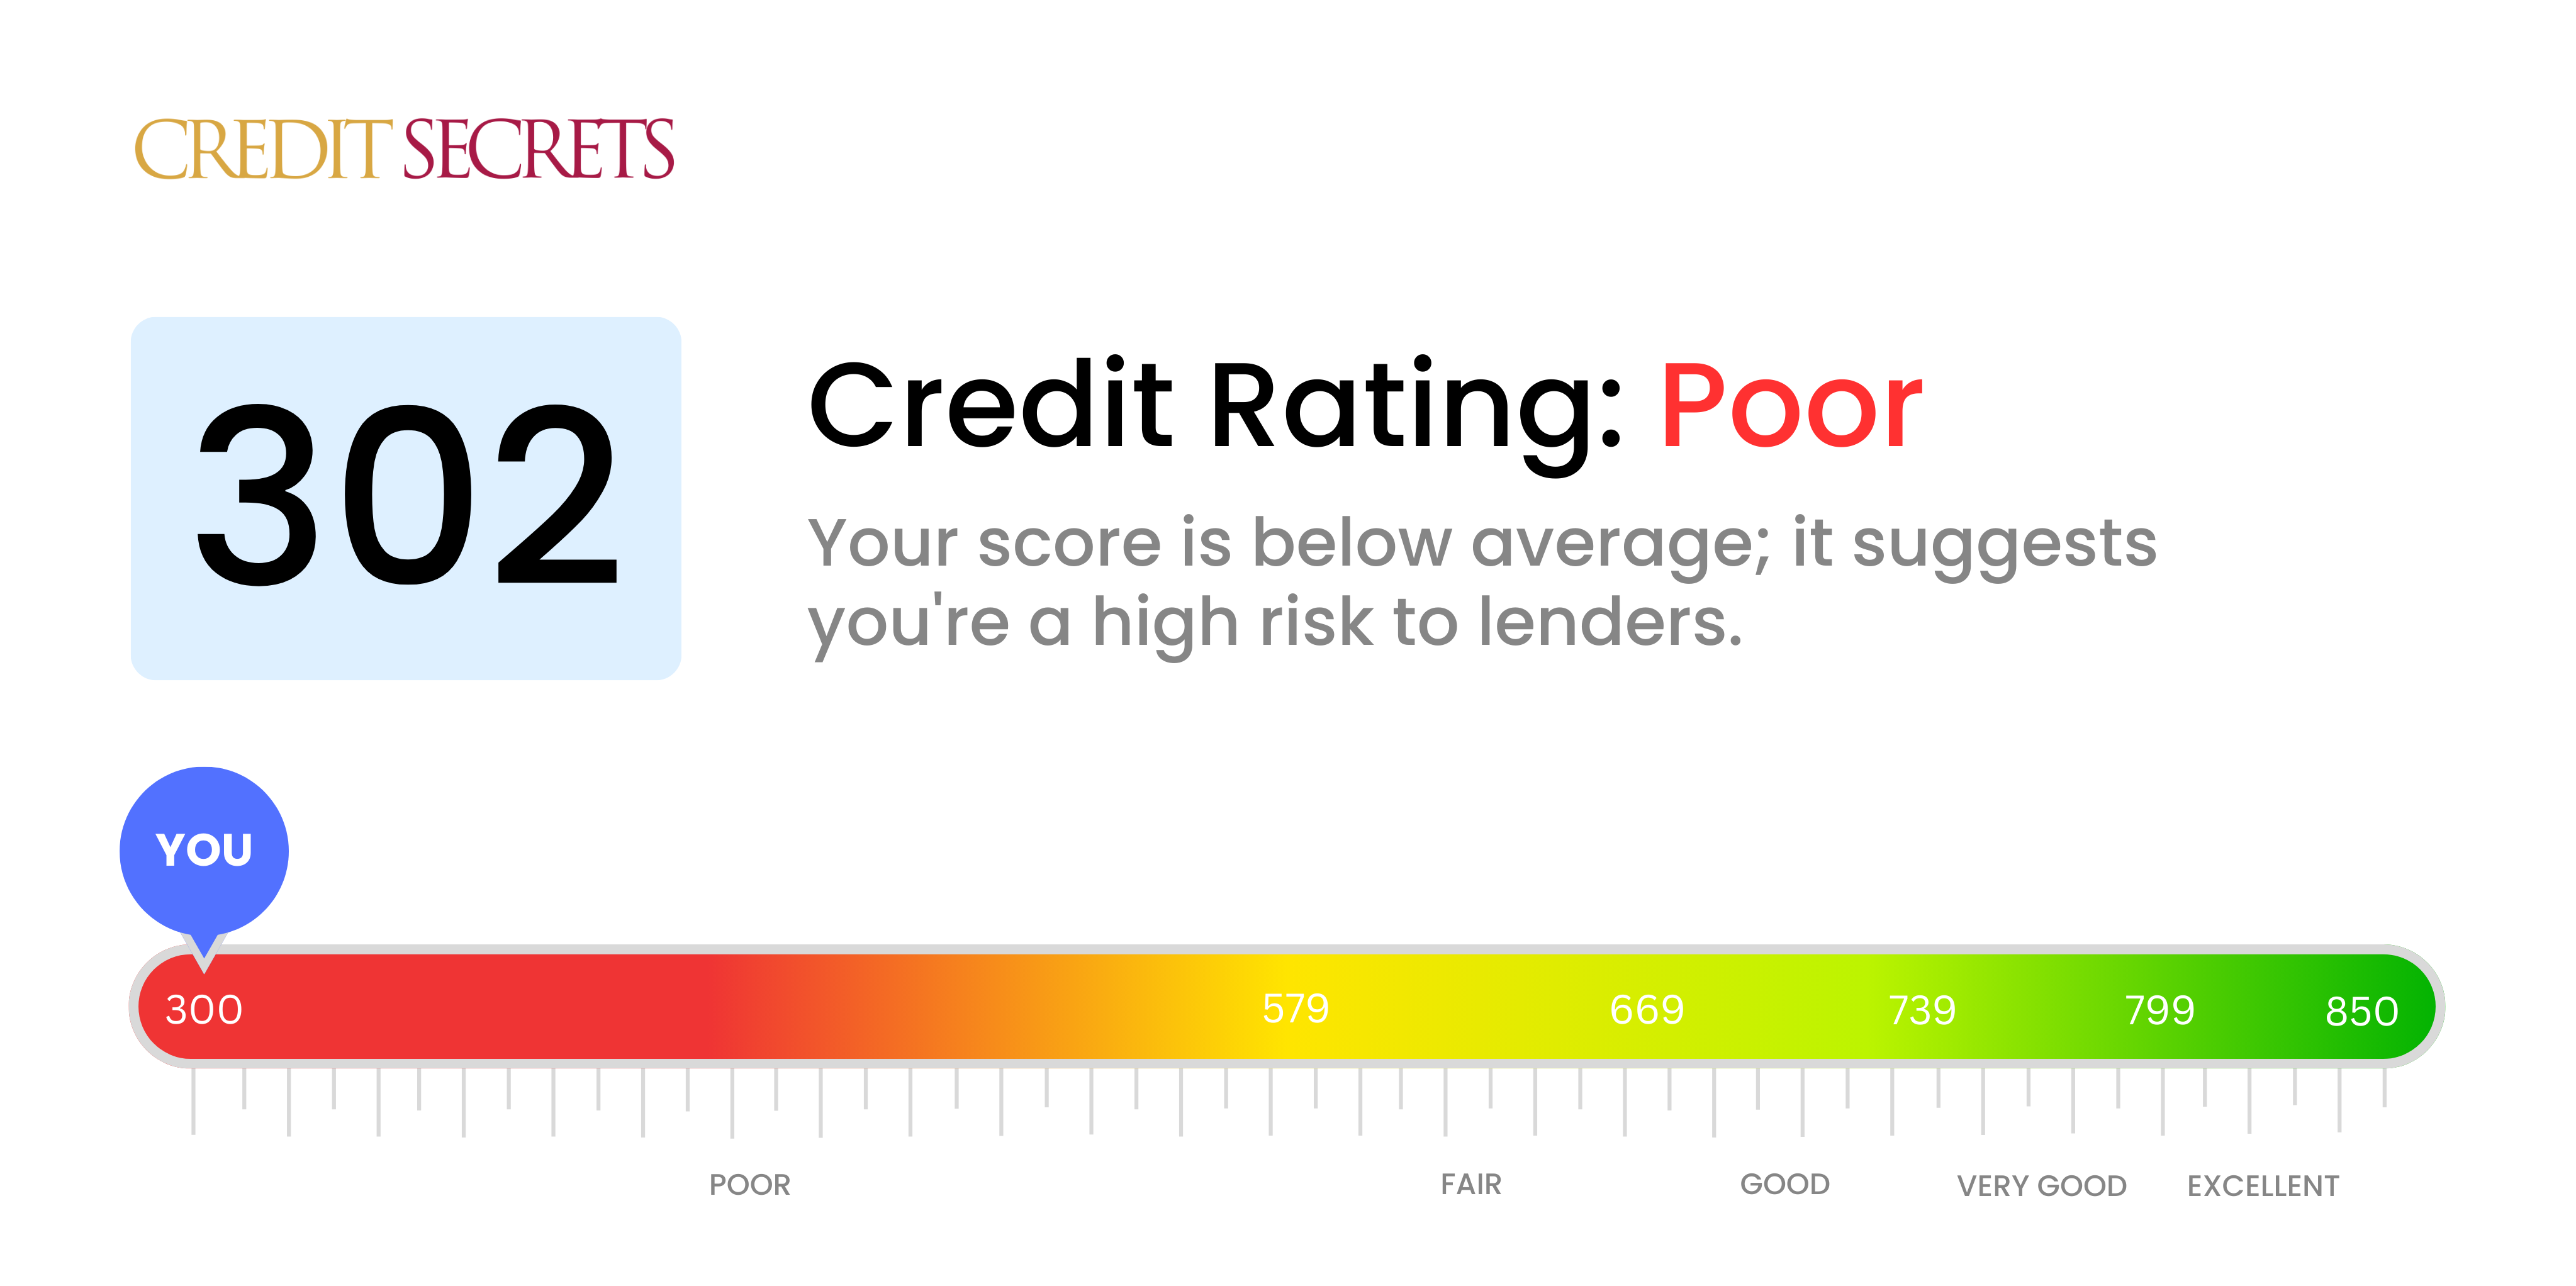 Is 302 a good credit score?